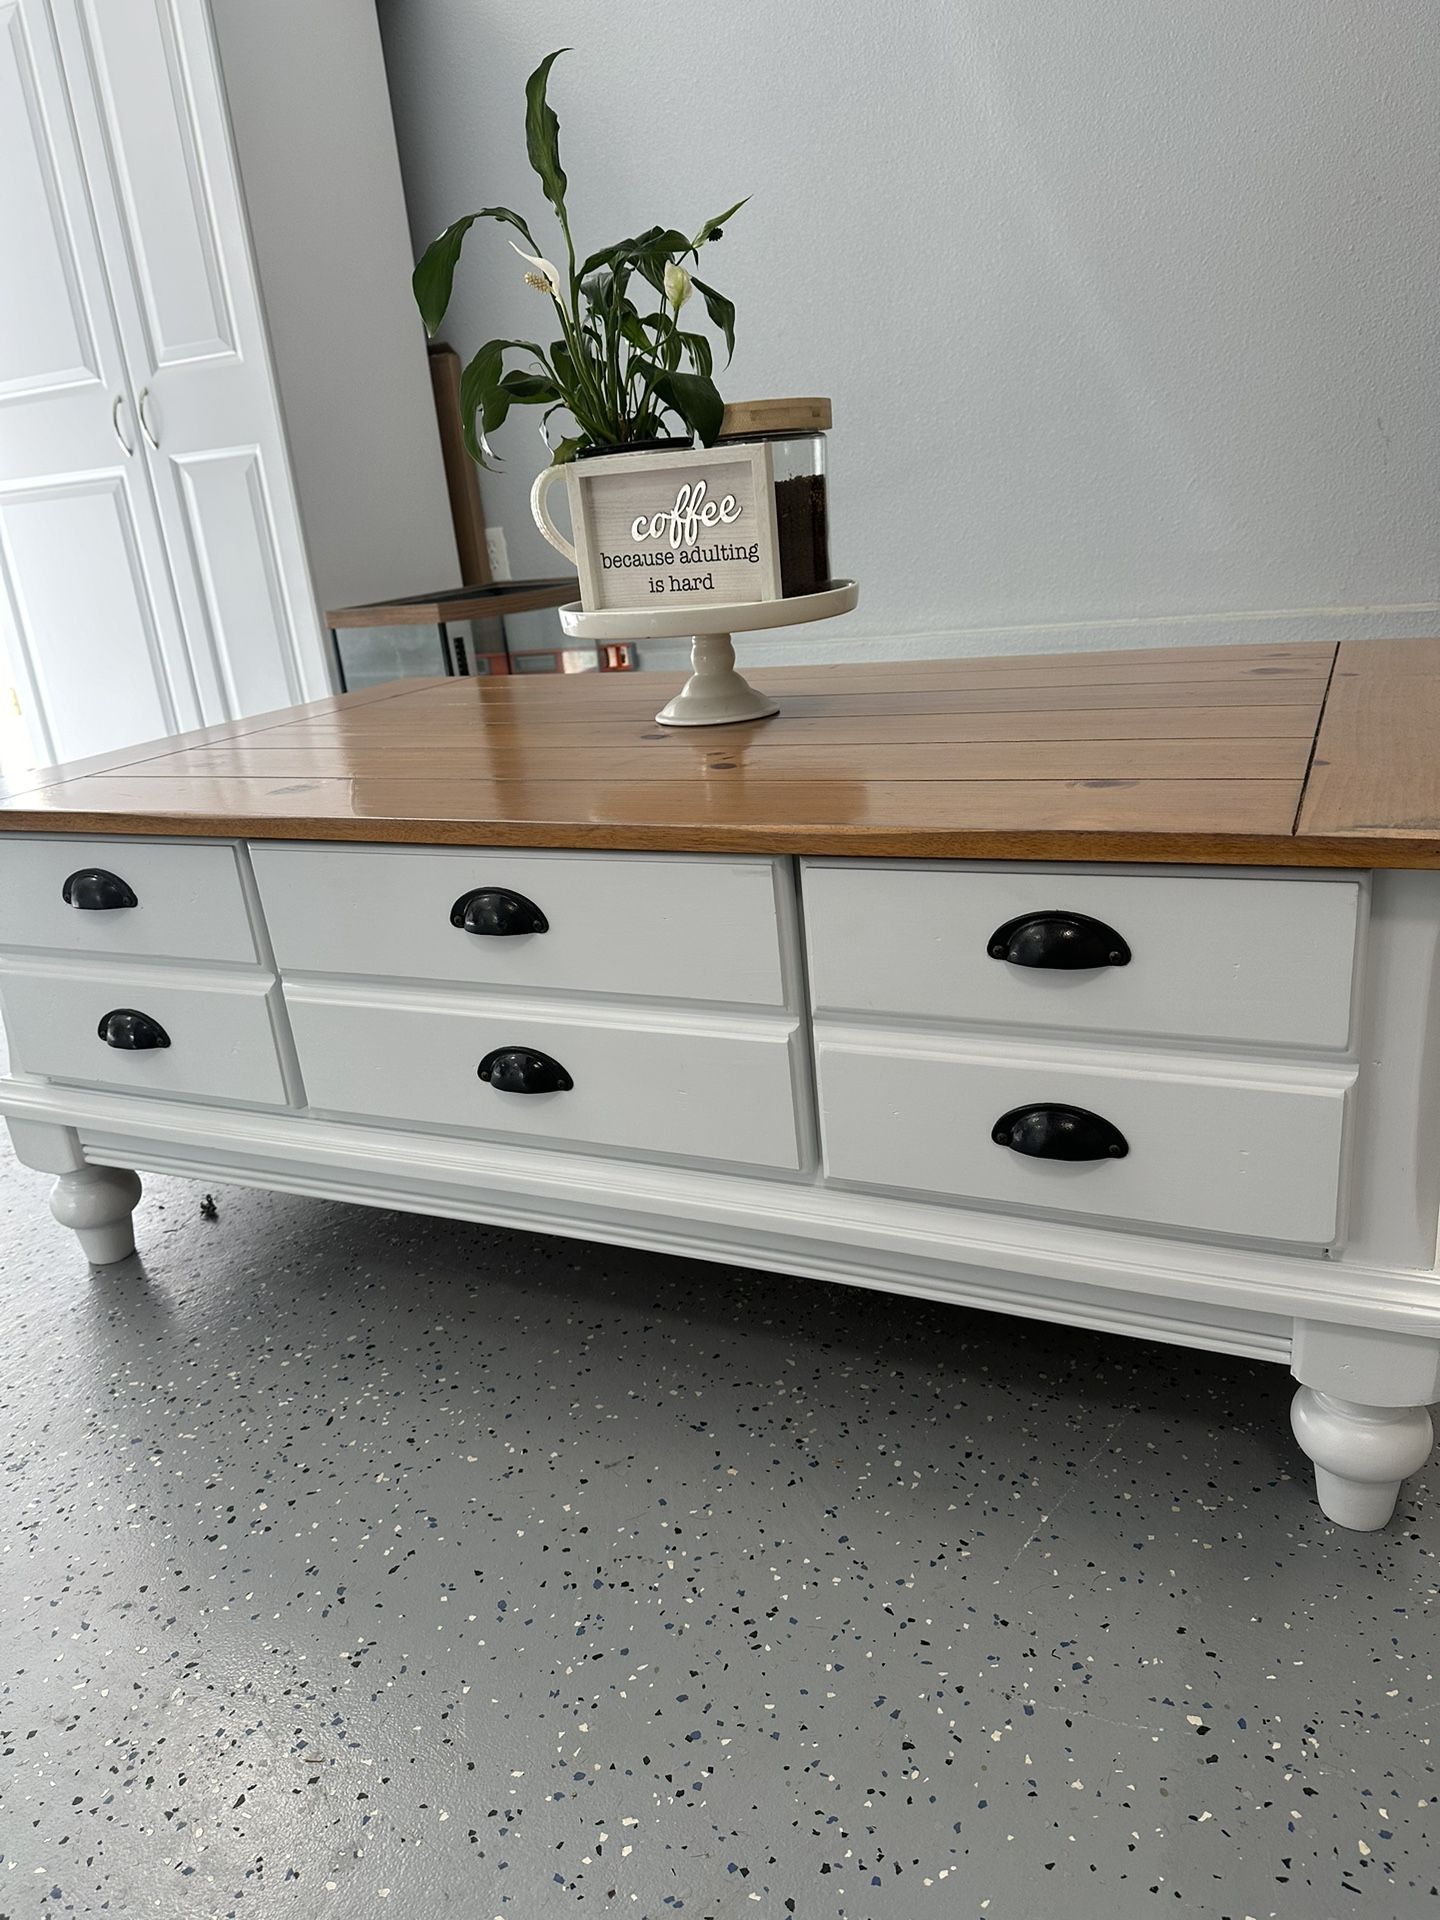 Farmhouse Coffee Table With Storage/drawers